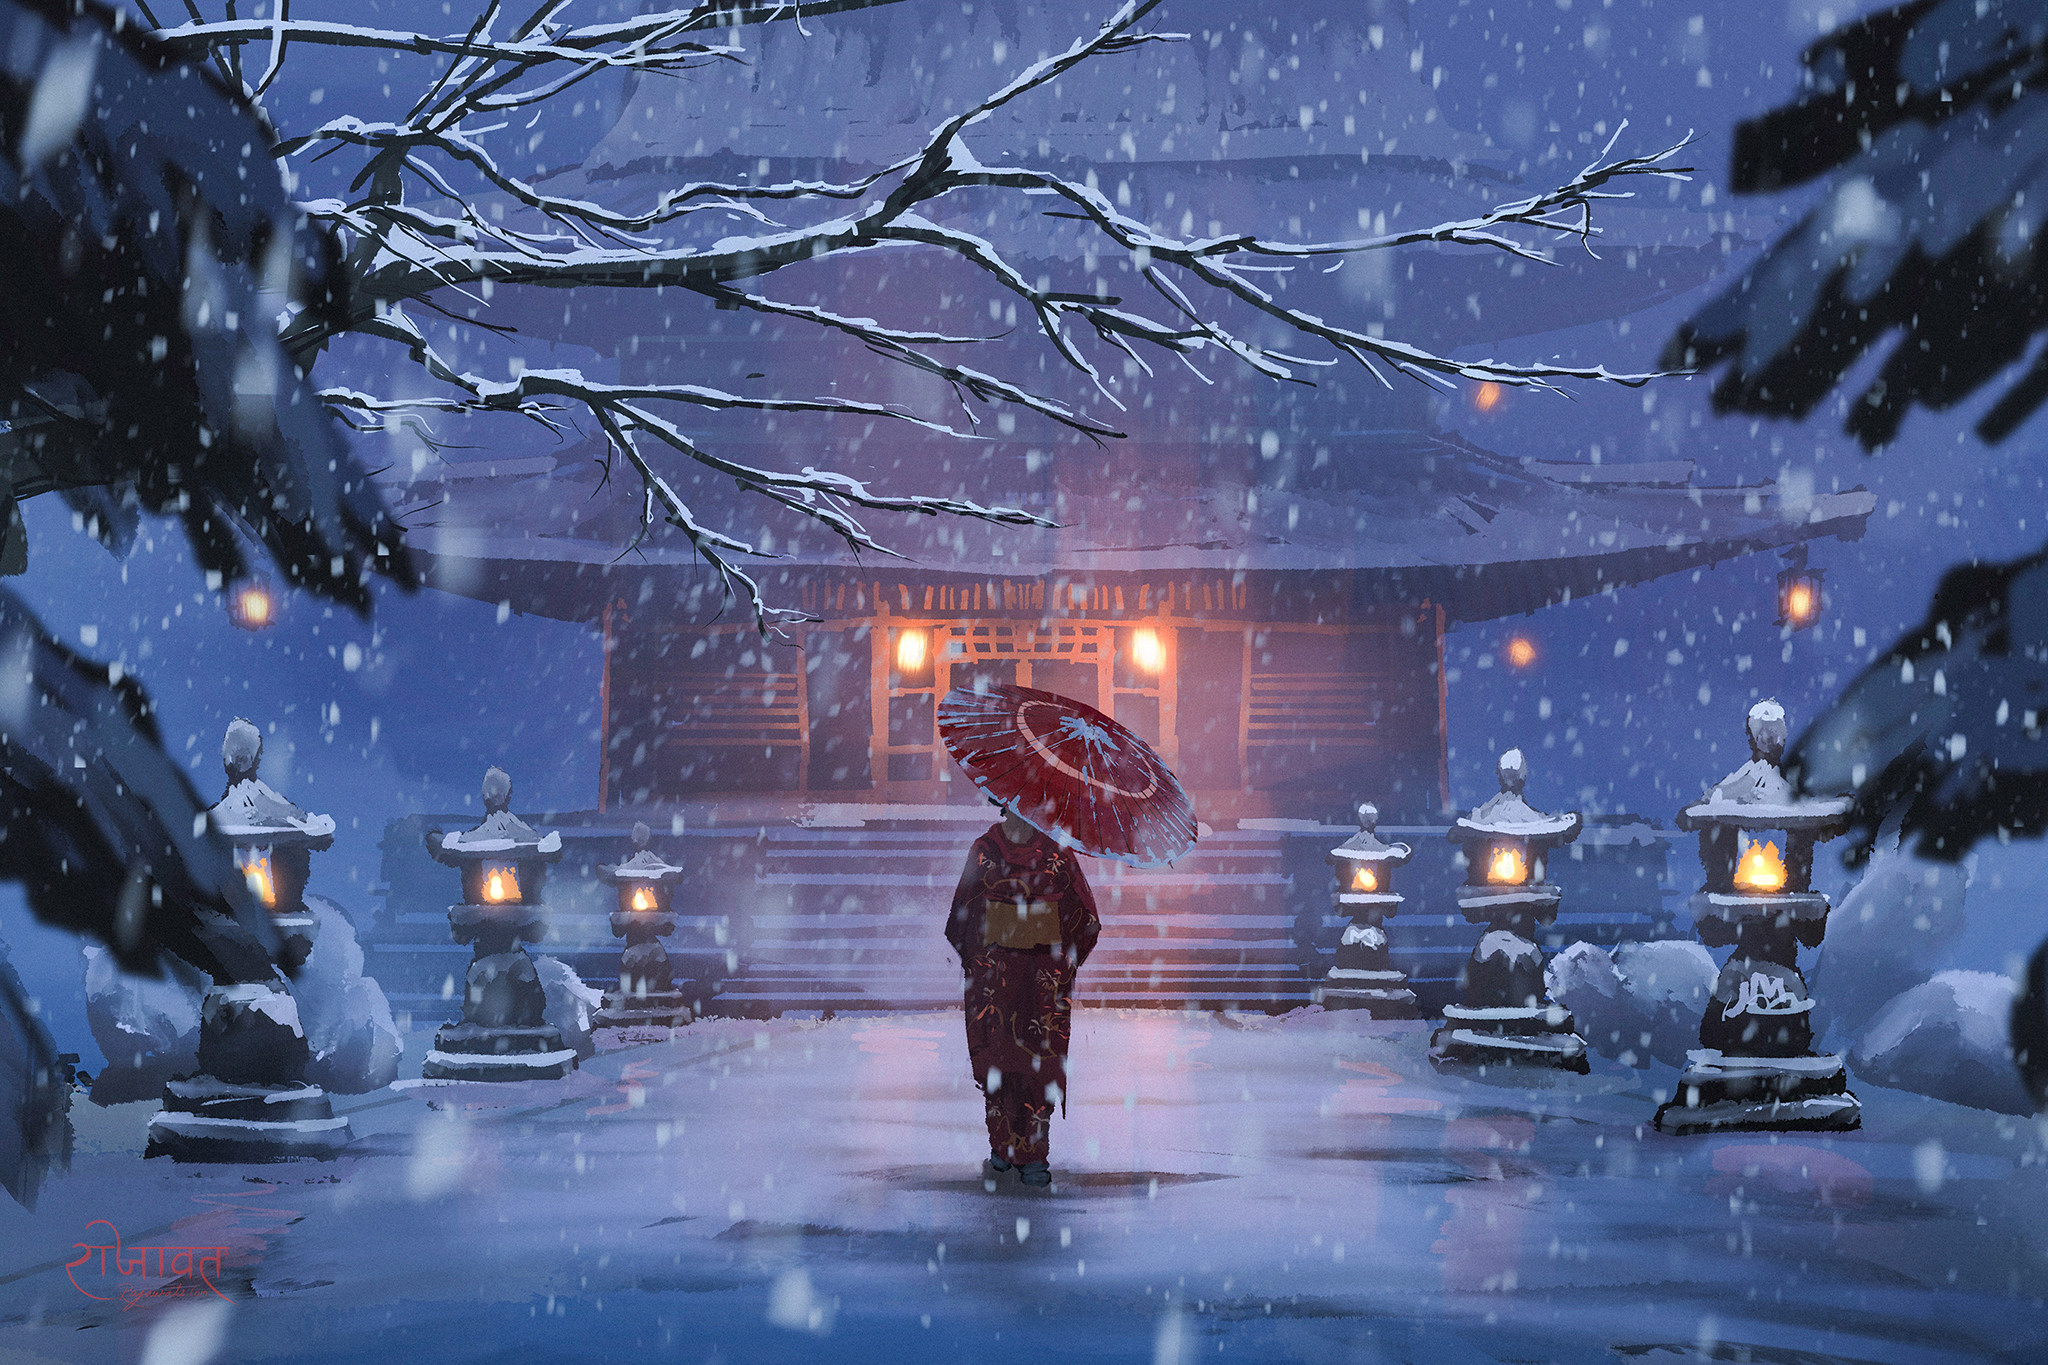 Visting a Japanese Temple on a Cold, Snowy Evening by Surendra Rajawat